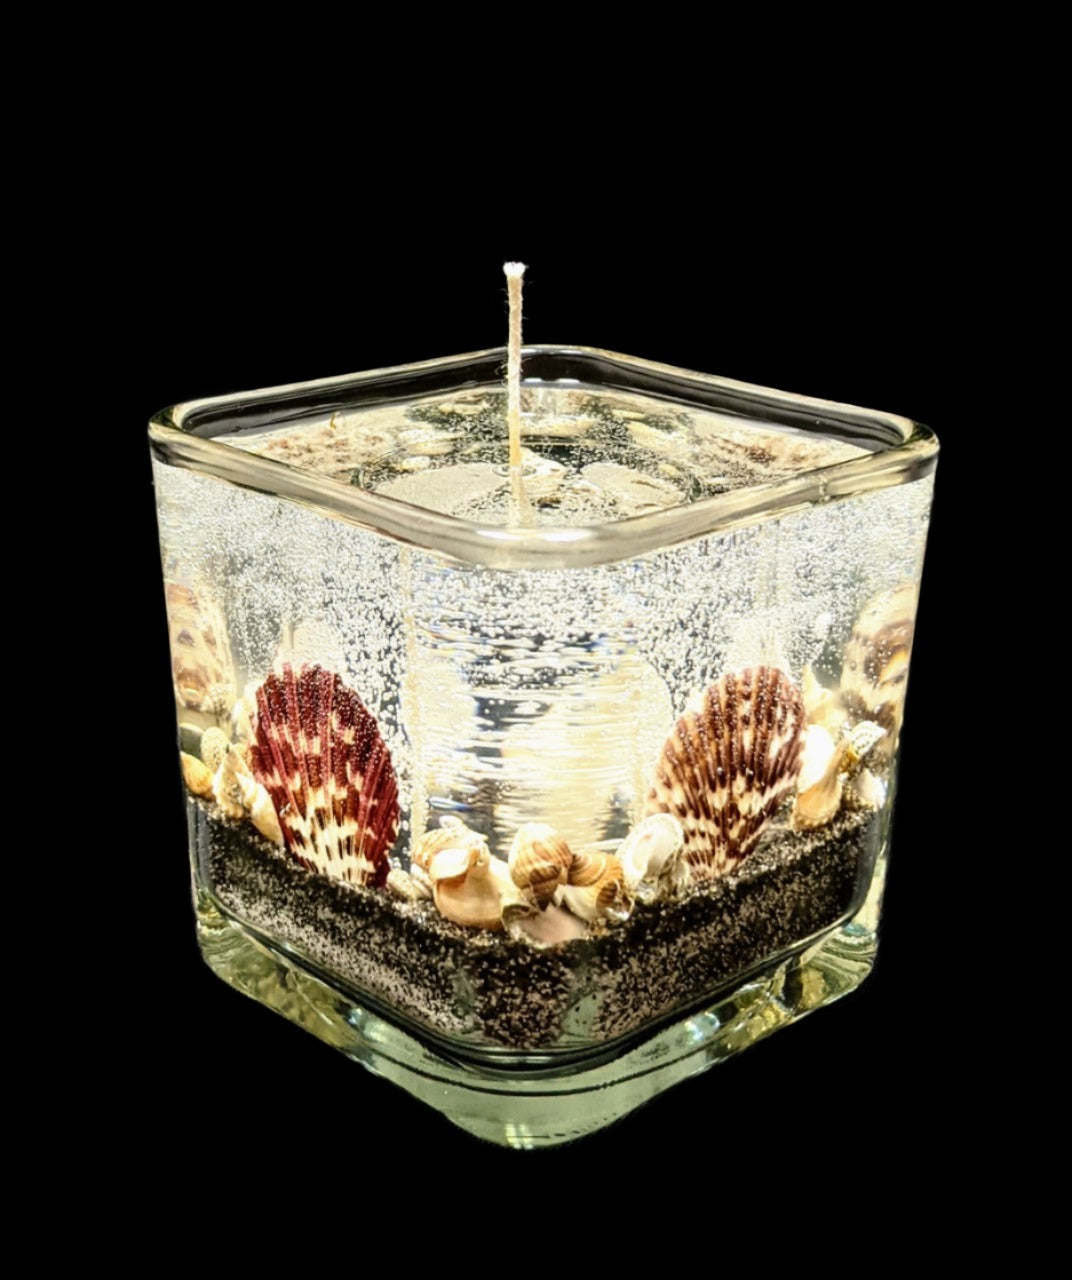 Small Square Seashell Candles